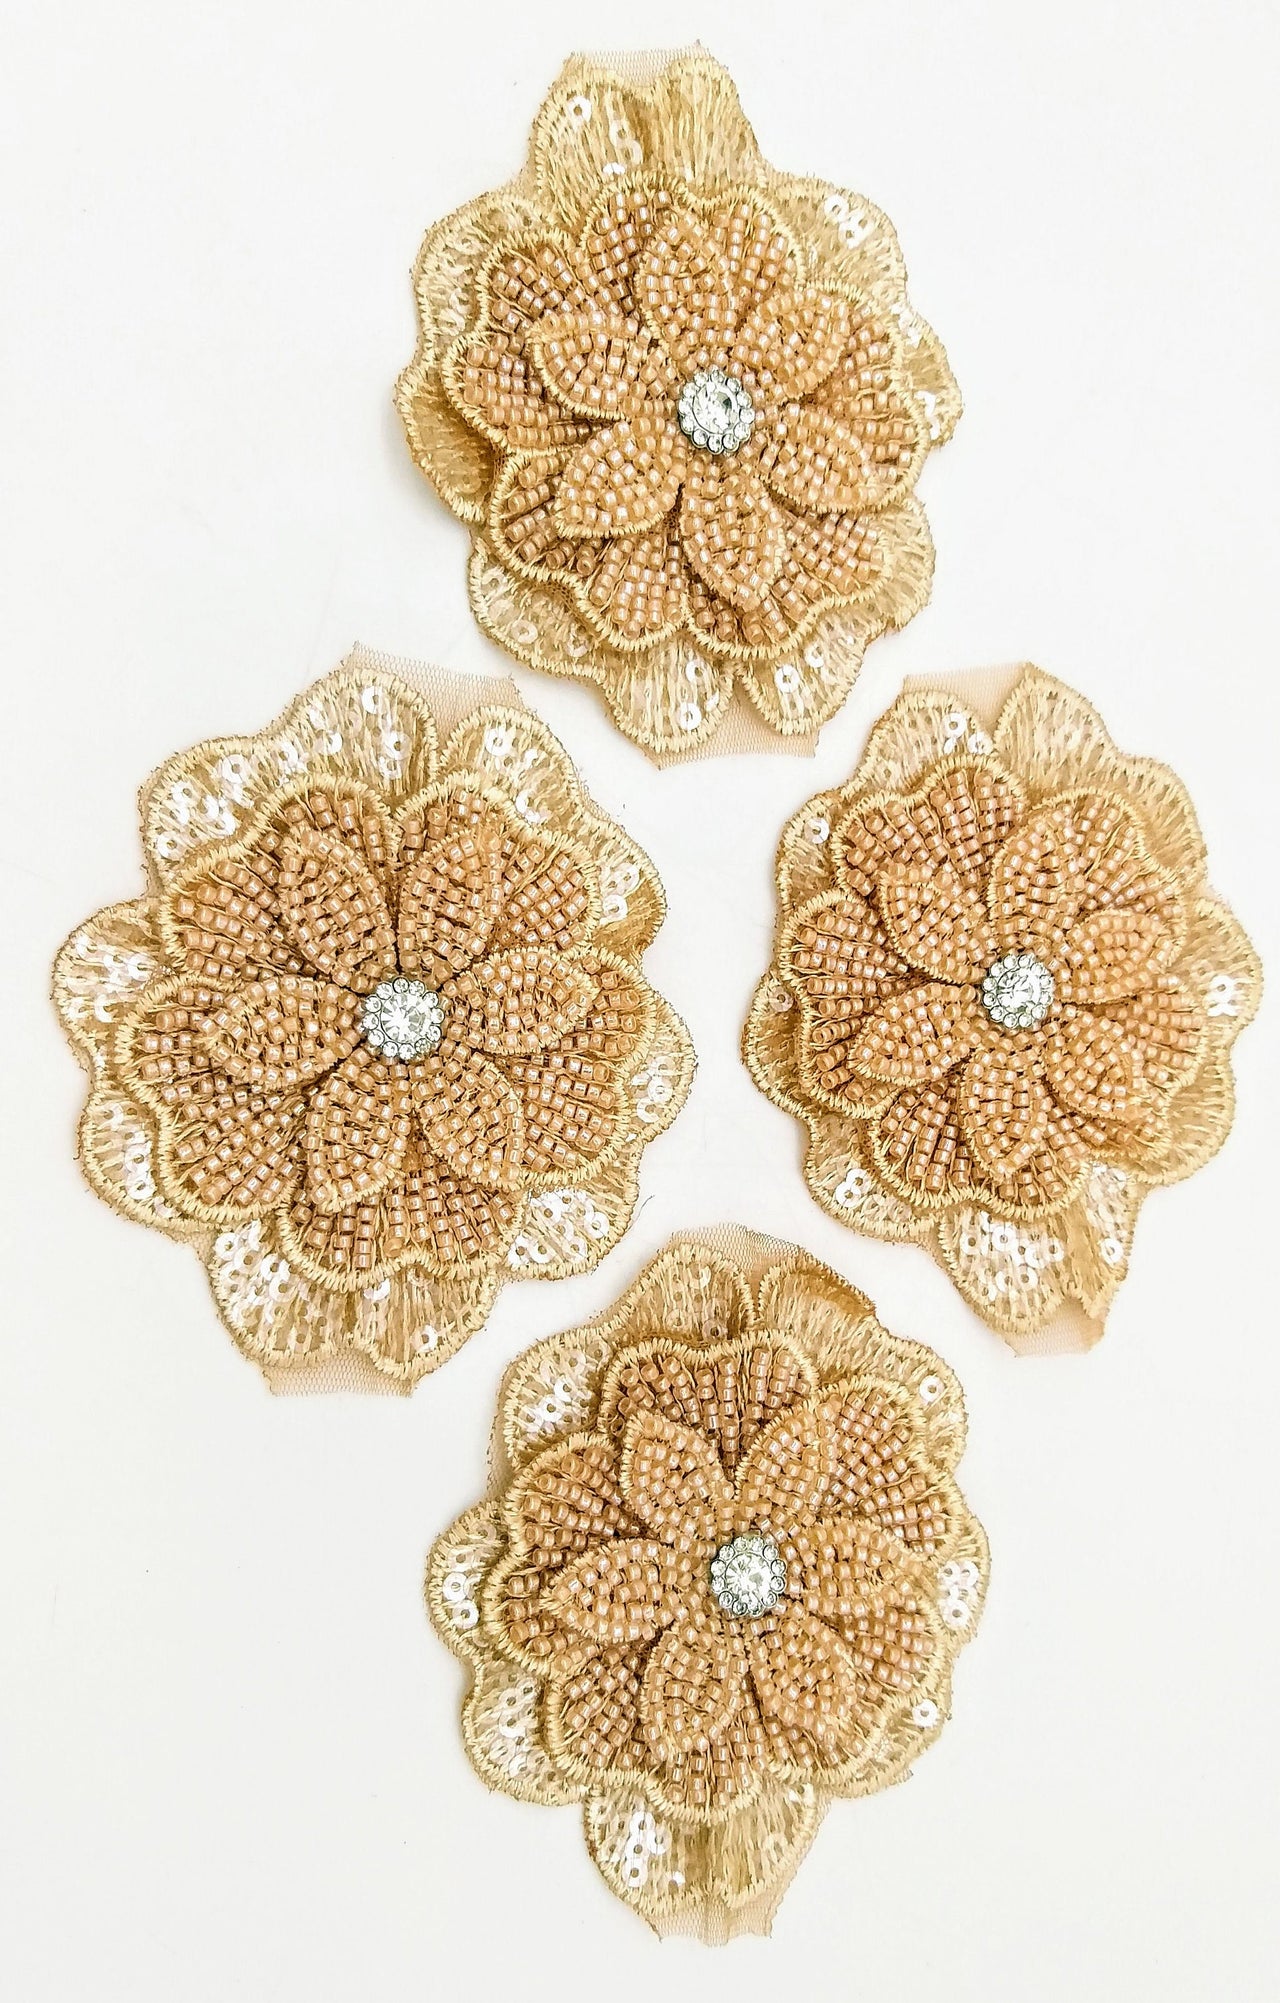 Brown Hand Embroidered Floral Applique With Beads, Crochet Cut Dana Applique, Beaded Flower Motifs